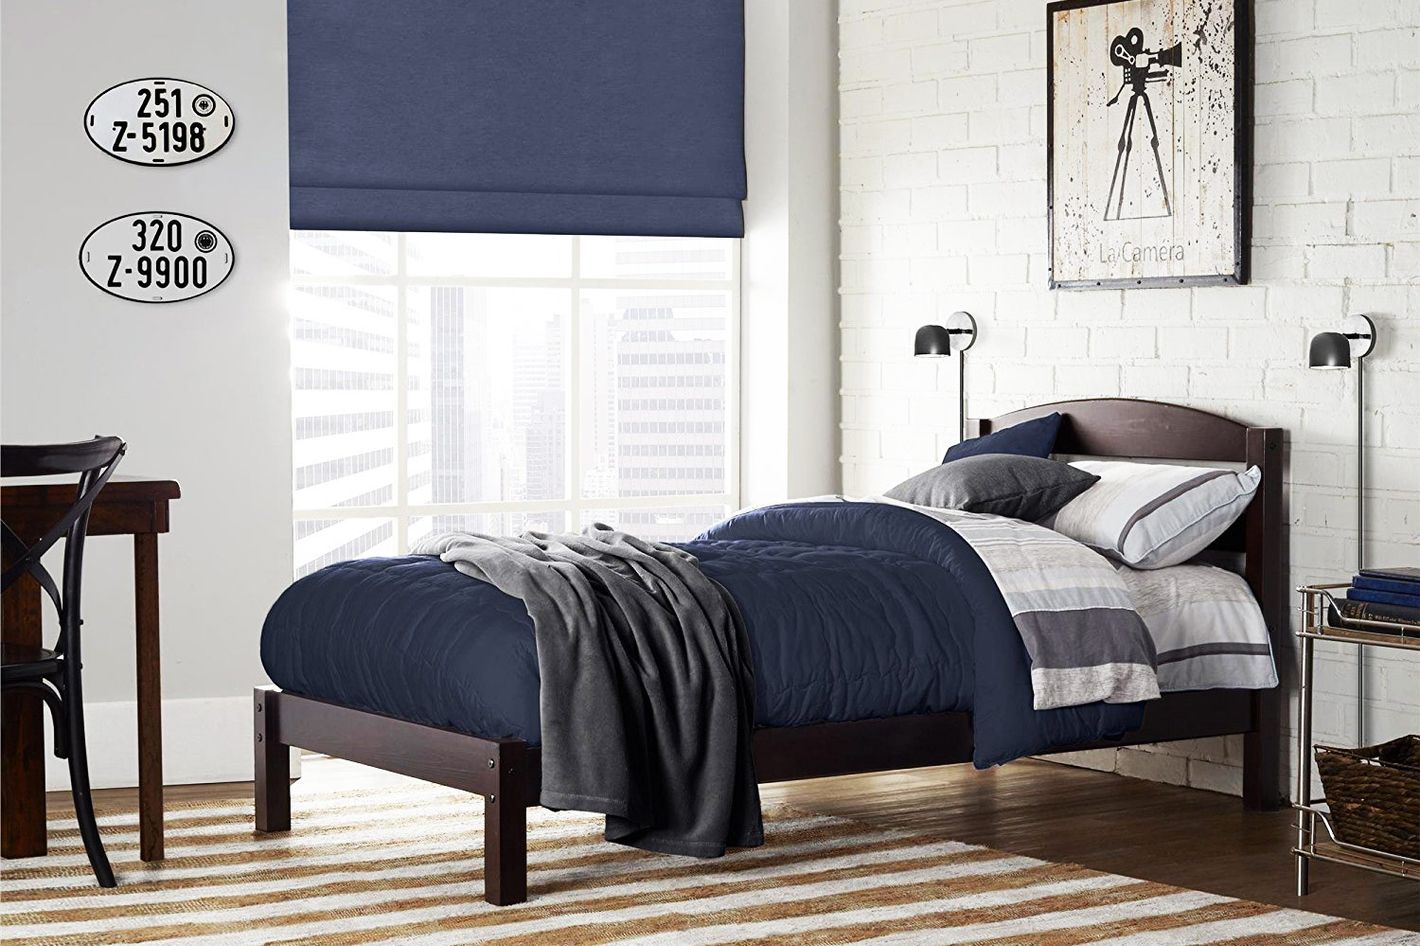 12 Best Twin Beds For Kids 2019, Make A Couch Out Of Twin Bed Frame